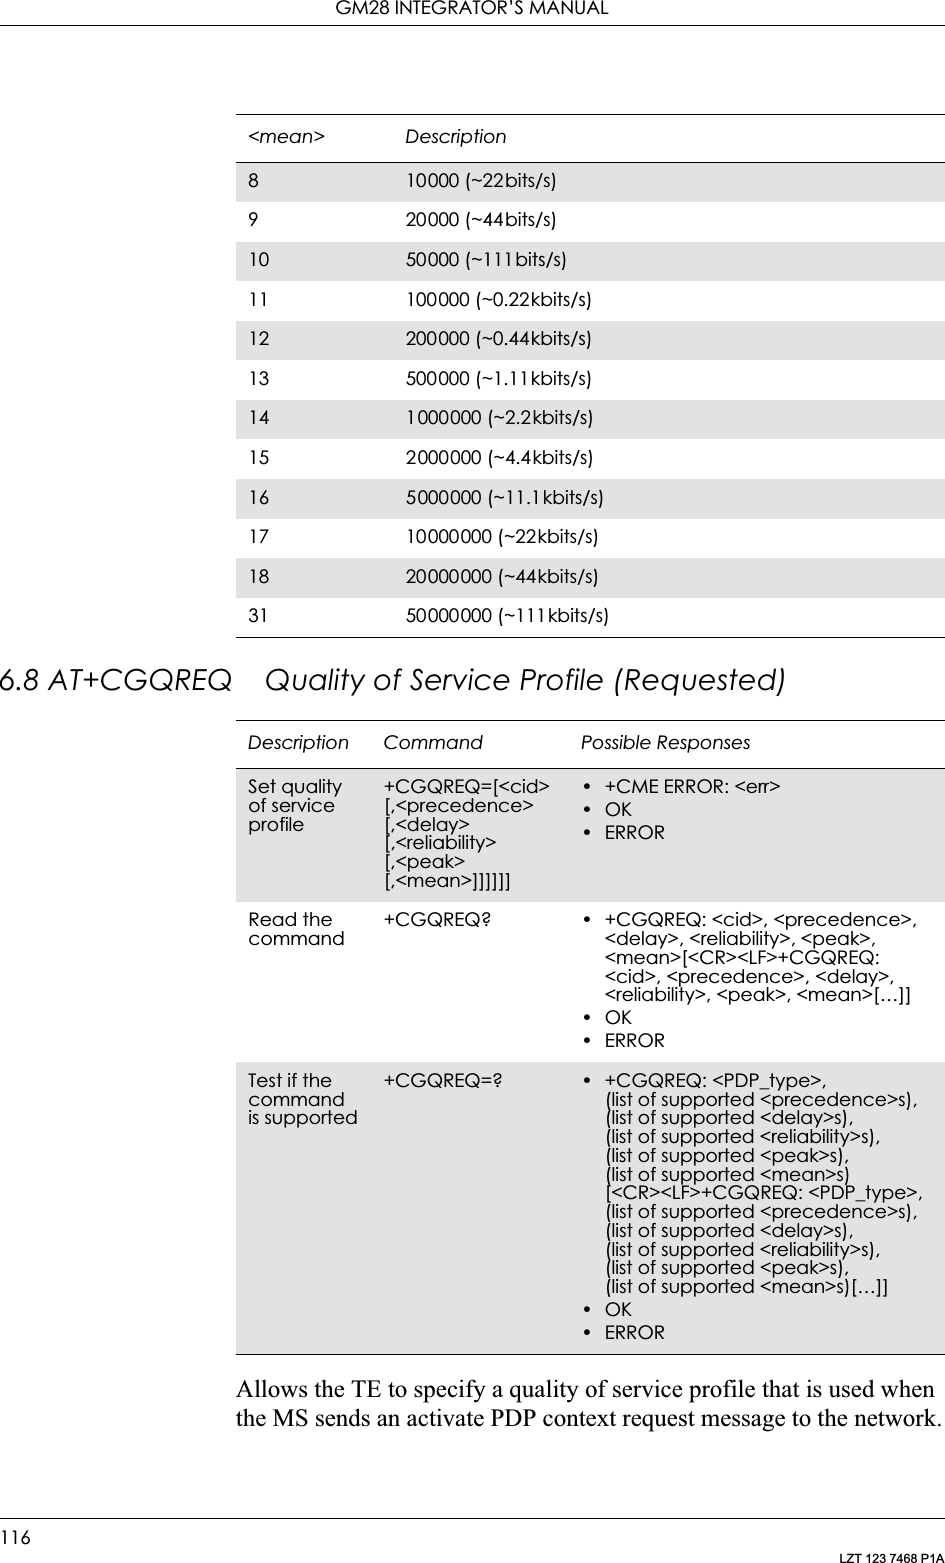 GM28 INTEGRATOR’S MANUAL116LZT 123 7468 P1A6.8 AT+CGQREQ Quality of Service Profile (Requested)Allows the TE to specify a quality of service profile that is used when the MS sends an activate PDP context request message to the network.810000 (~22bits/s)9 20000 (~44bits/s)10 50000 (~111bits/s)11 100000 (~0.22kbits/s)12 200000 (~0.44kbits/s)13 500000 (~1.11kbits/s)14 1000000 (~2.2kbits/s)15 2000000 (~4.4kbits/s)16 5000000 (~11.1kbits/s)17 10000000 (~22kbits/s)18 20000000 (~44kbits/s)31 50000000 (~111kbits/s)&lt;mean&gt; DescriptionDescription Command Possible ResponsesSet quality of service profile+CGQREQ=[&lt;cid&gt; [,&lt;precedence&gt; [,&lt;delay&gt; [,&lt;reliability&gt; [,&lt;peak&gt; [,&lt;mean&gt;]]]]]]• +CME ERROR: &lt;err&gt;•OK•ERRORRead the command+CGQREQ? • +CGQREQ: &lt;cid&gt;, &lt;precedence&gt;, &lt;delay&gt;, &lt;reliability&gt;, &lt;peak&gt;, &lt;mean&gt;[&lt;CR&gt;&lt;LF&gt;+CGQREQ: &lt;cid&gt;, &lt;precedence&gt;, &lt;delay&gt;, &lt;reliability&gt;, &lt;peak&gt;, &lt;mean&gt;[…]]•OK•ERRORTest if the command is supported+CGQREQ=? • +CGQREQ: &lt;PDP_type&gt;,(list of supported &lt;precedence&gt;s),(list of supported &lt;delay&gt;s),(list of supported &lt;reliability&gt;s),(list of supported &lt;peak&gt;s),(list of supported &lt;mean&gt;s) [&lt;CR&gt;&lt;LF&gt;+CGQREQ: &lt;PDP_type&gt;, (list of supported &lt;precedence&gt;s), (list of supported &lt;delay&gt;s),(list of supported &lt;reliability&gt;s),(list of supported &lt;peak&gt;s),(list of supported &lt;mean&gt;s)[…]]•OK•ERROR